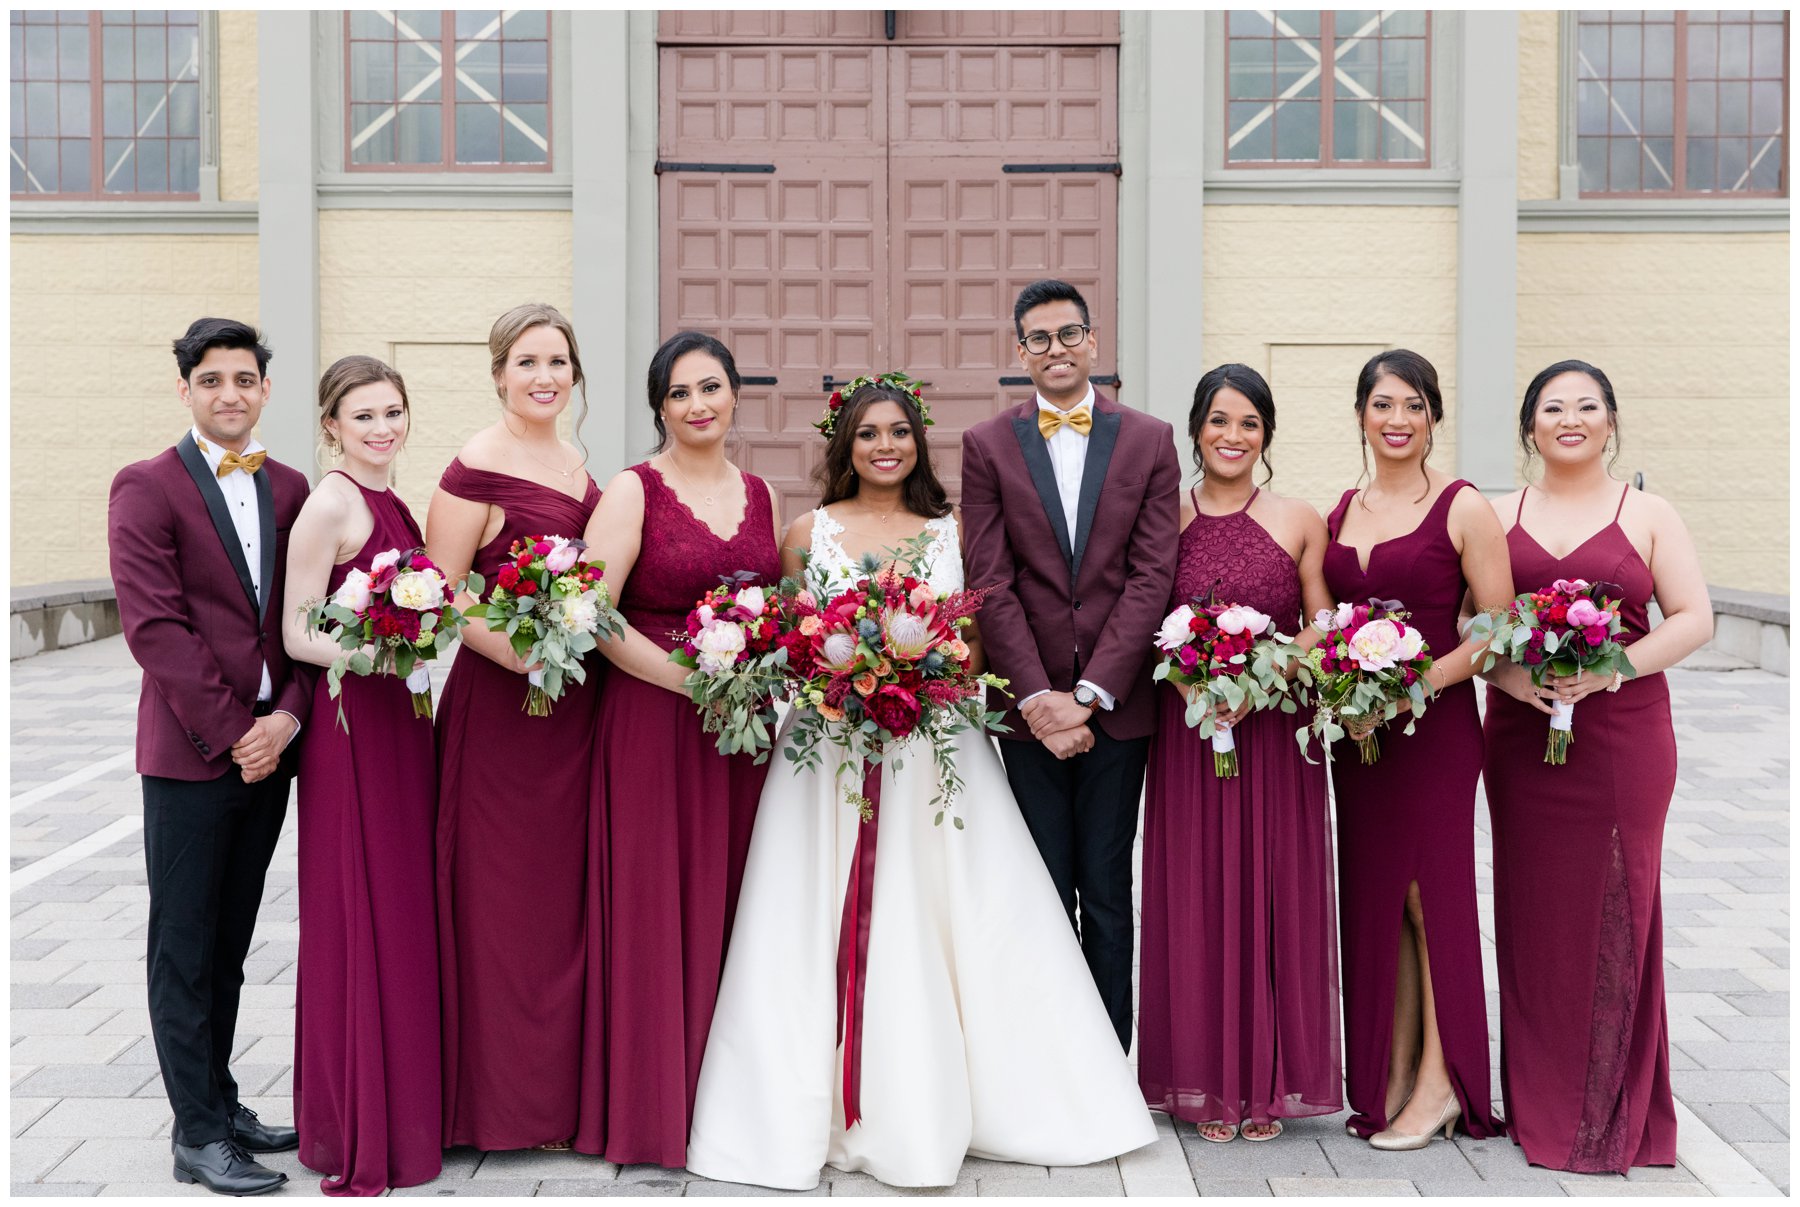 Burgundy bridesmaids and bridesman Wedding at the Horticulture Building